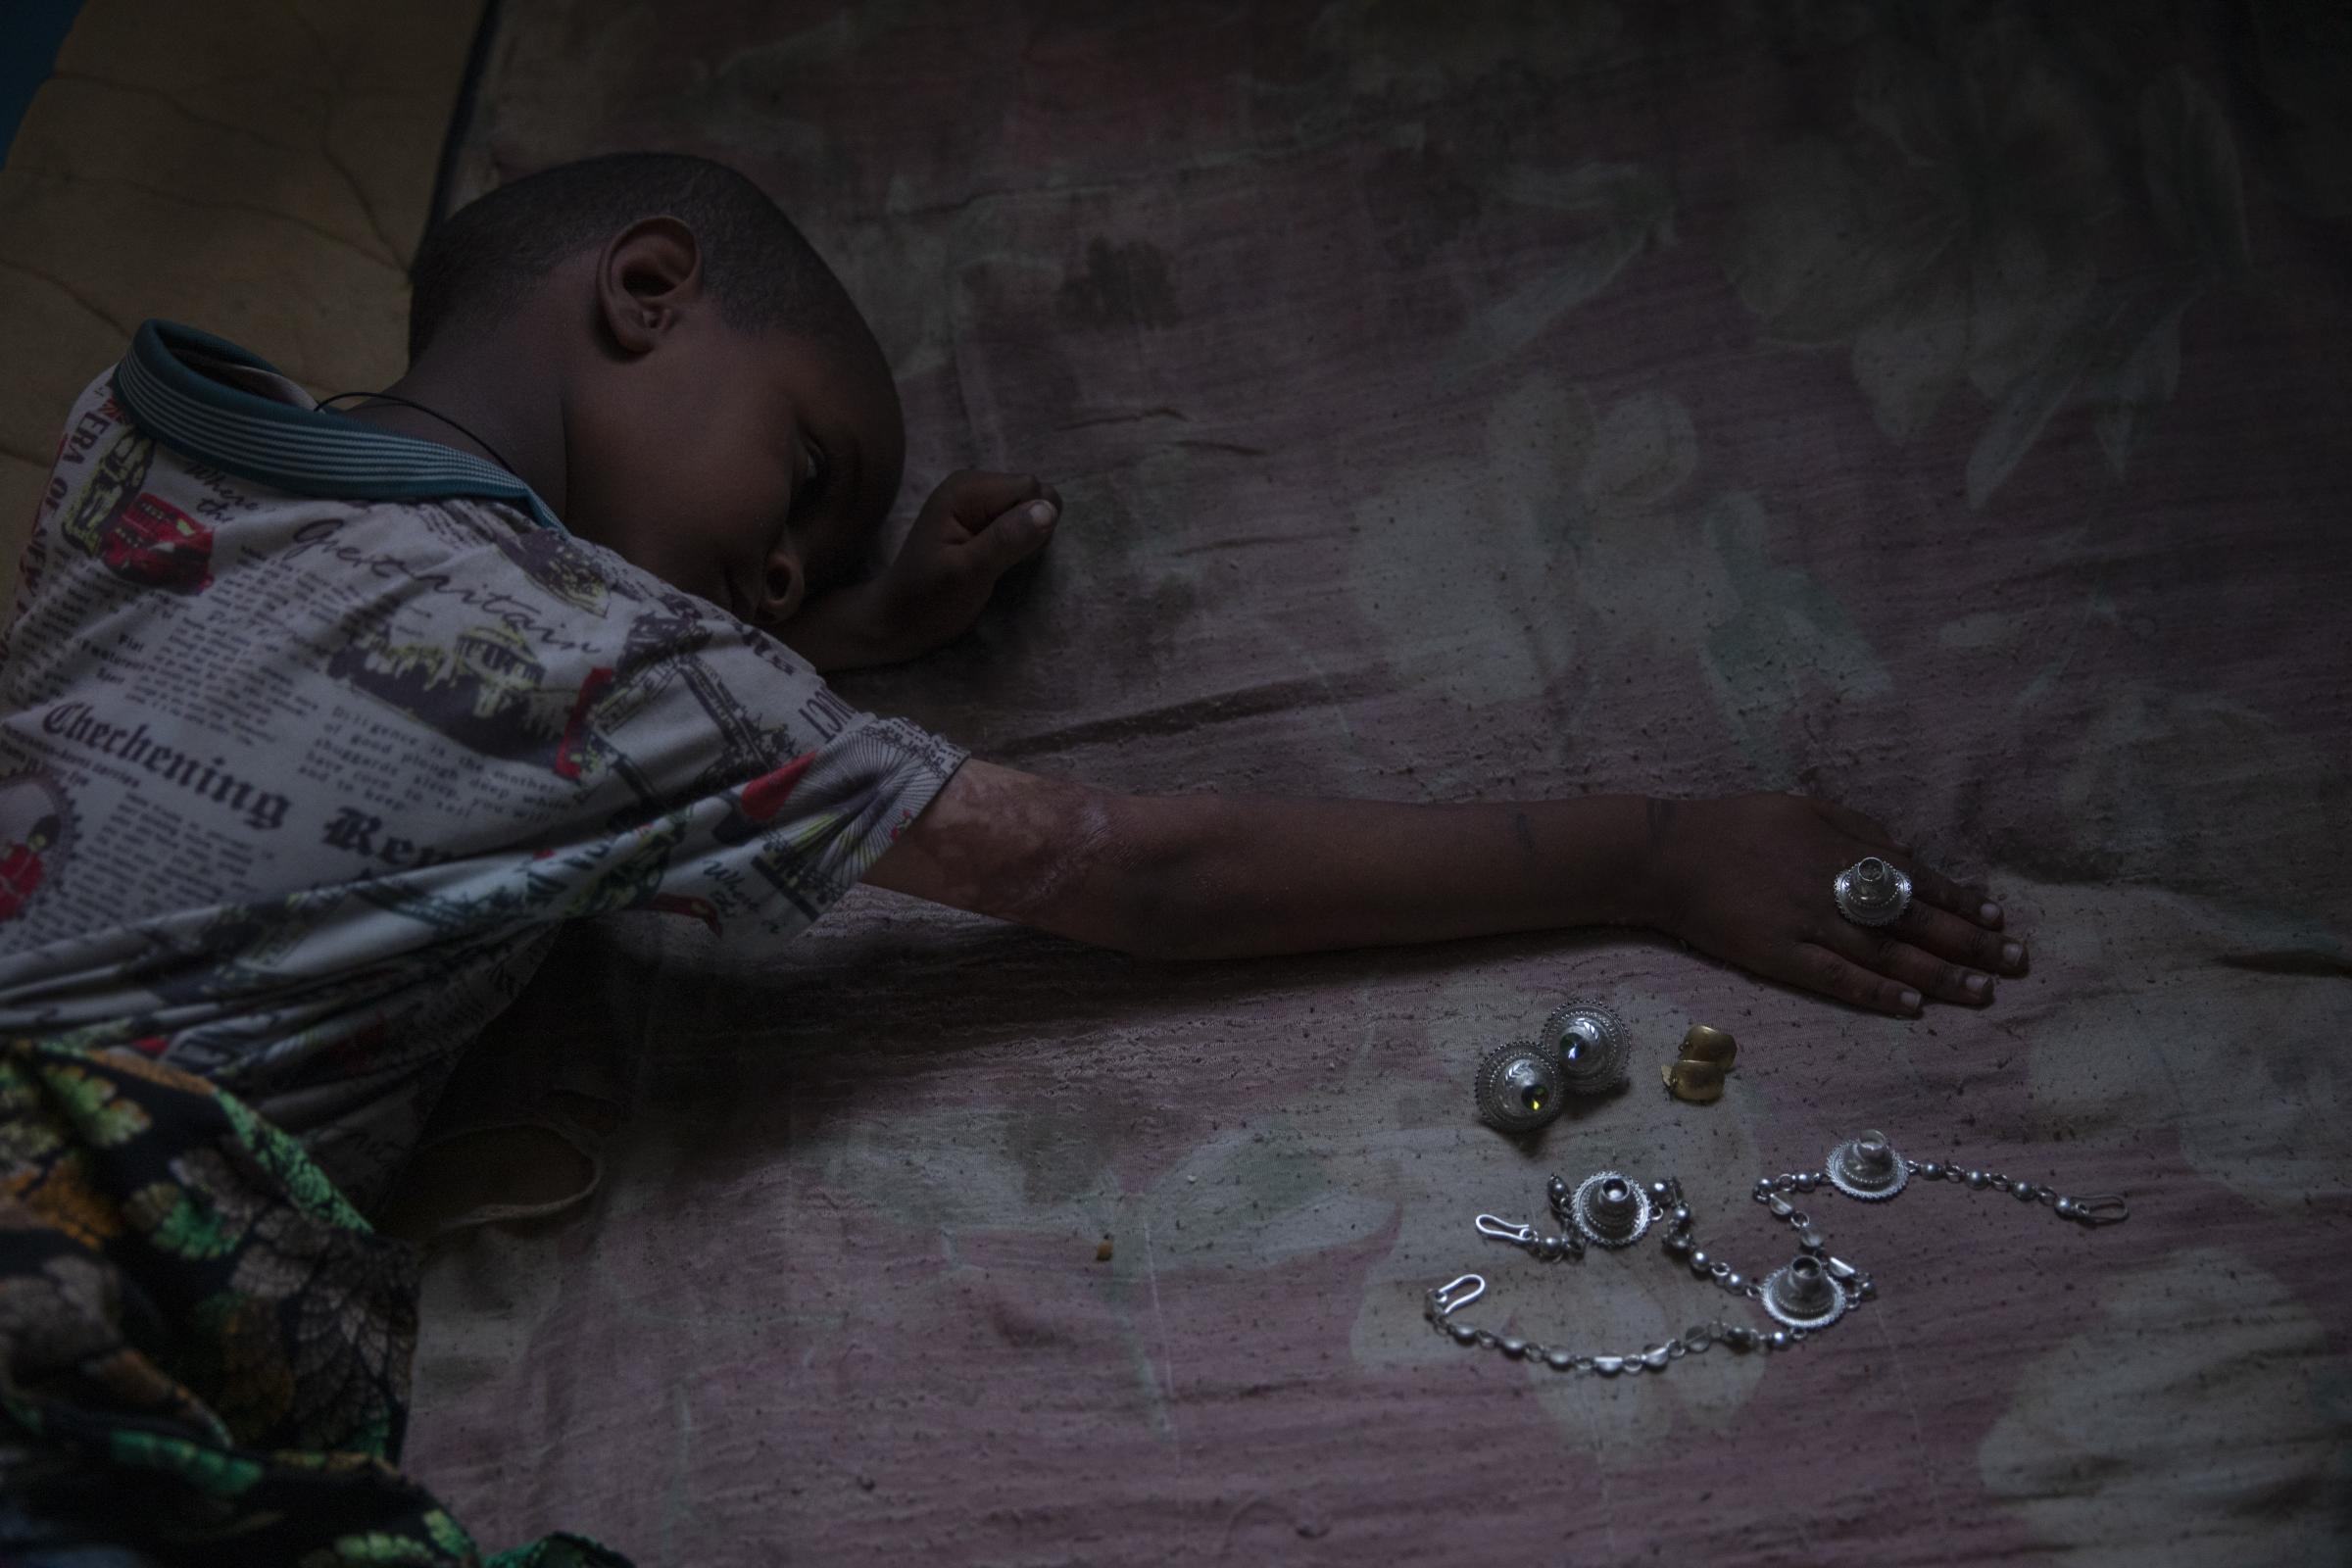 Tigray babies born in bloodshed  -  Micheale wears his deceased mother's jewelry. 